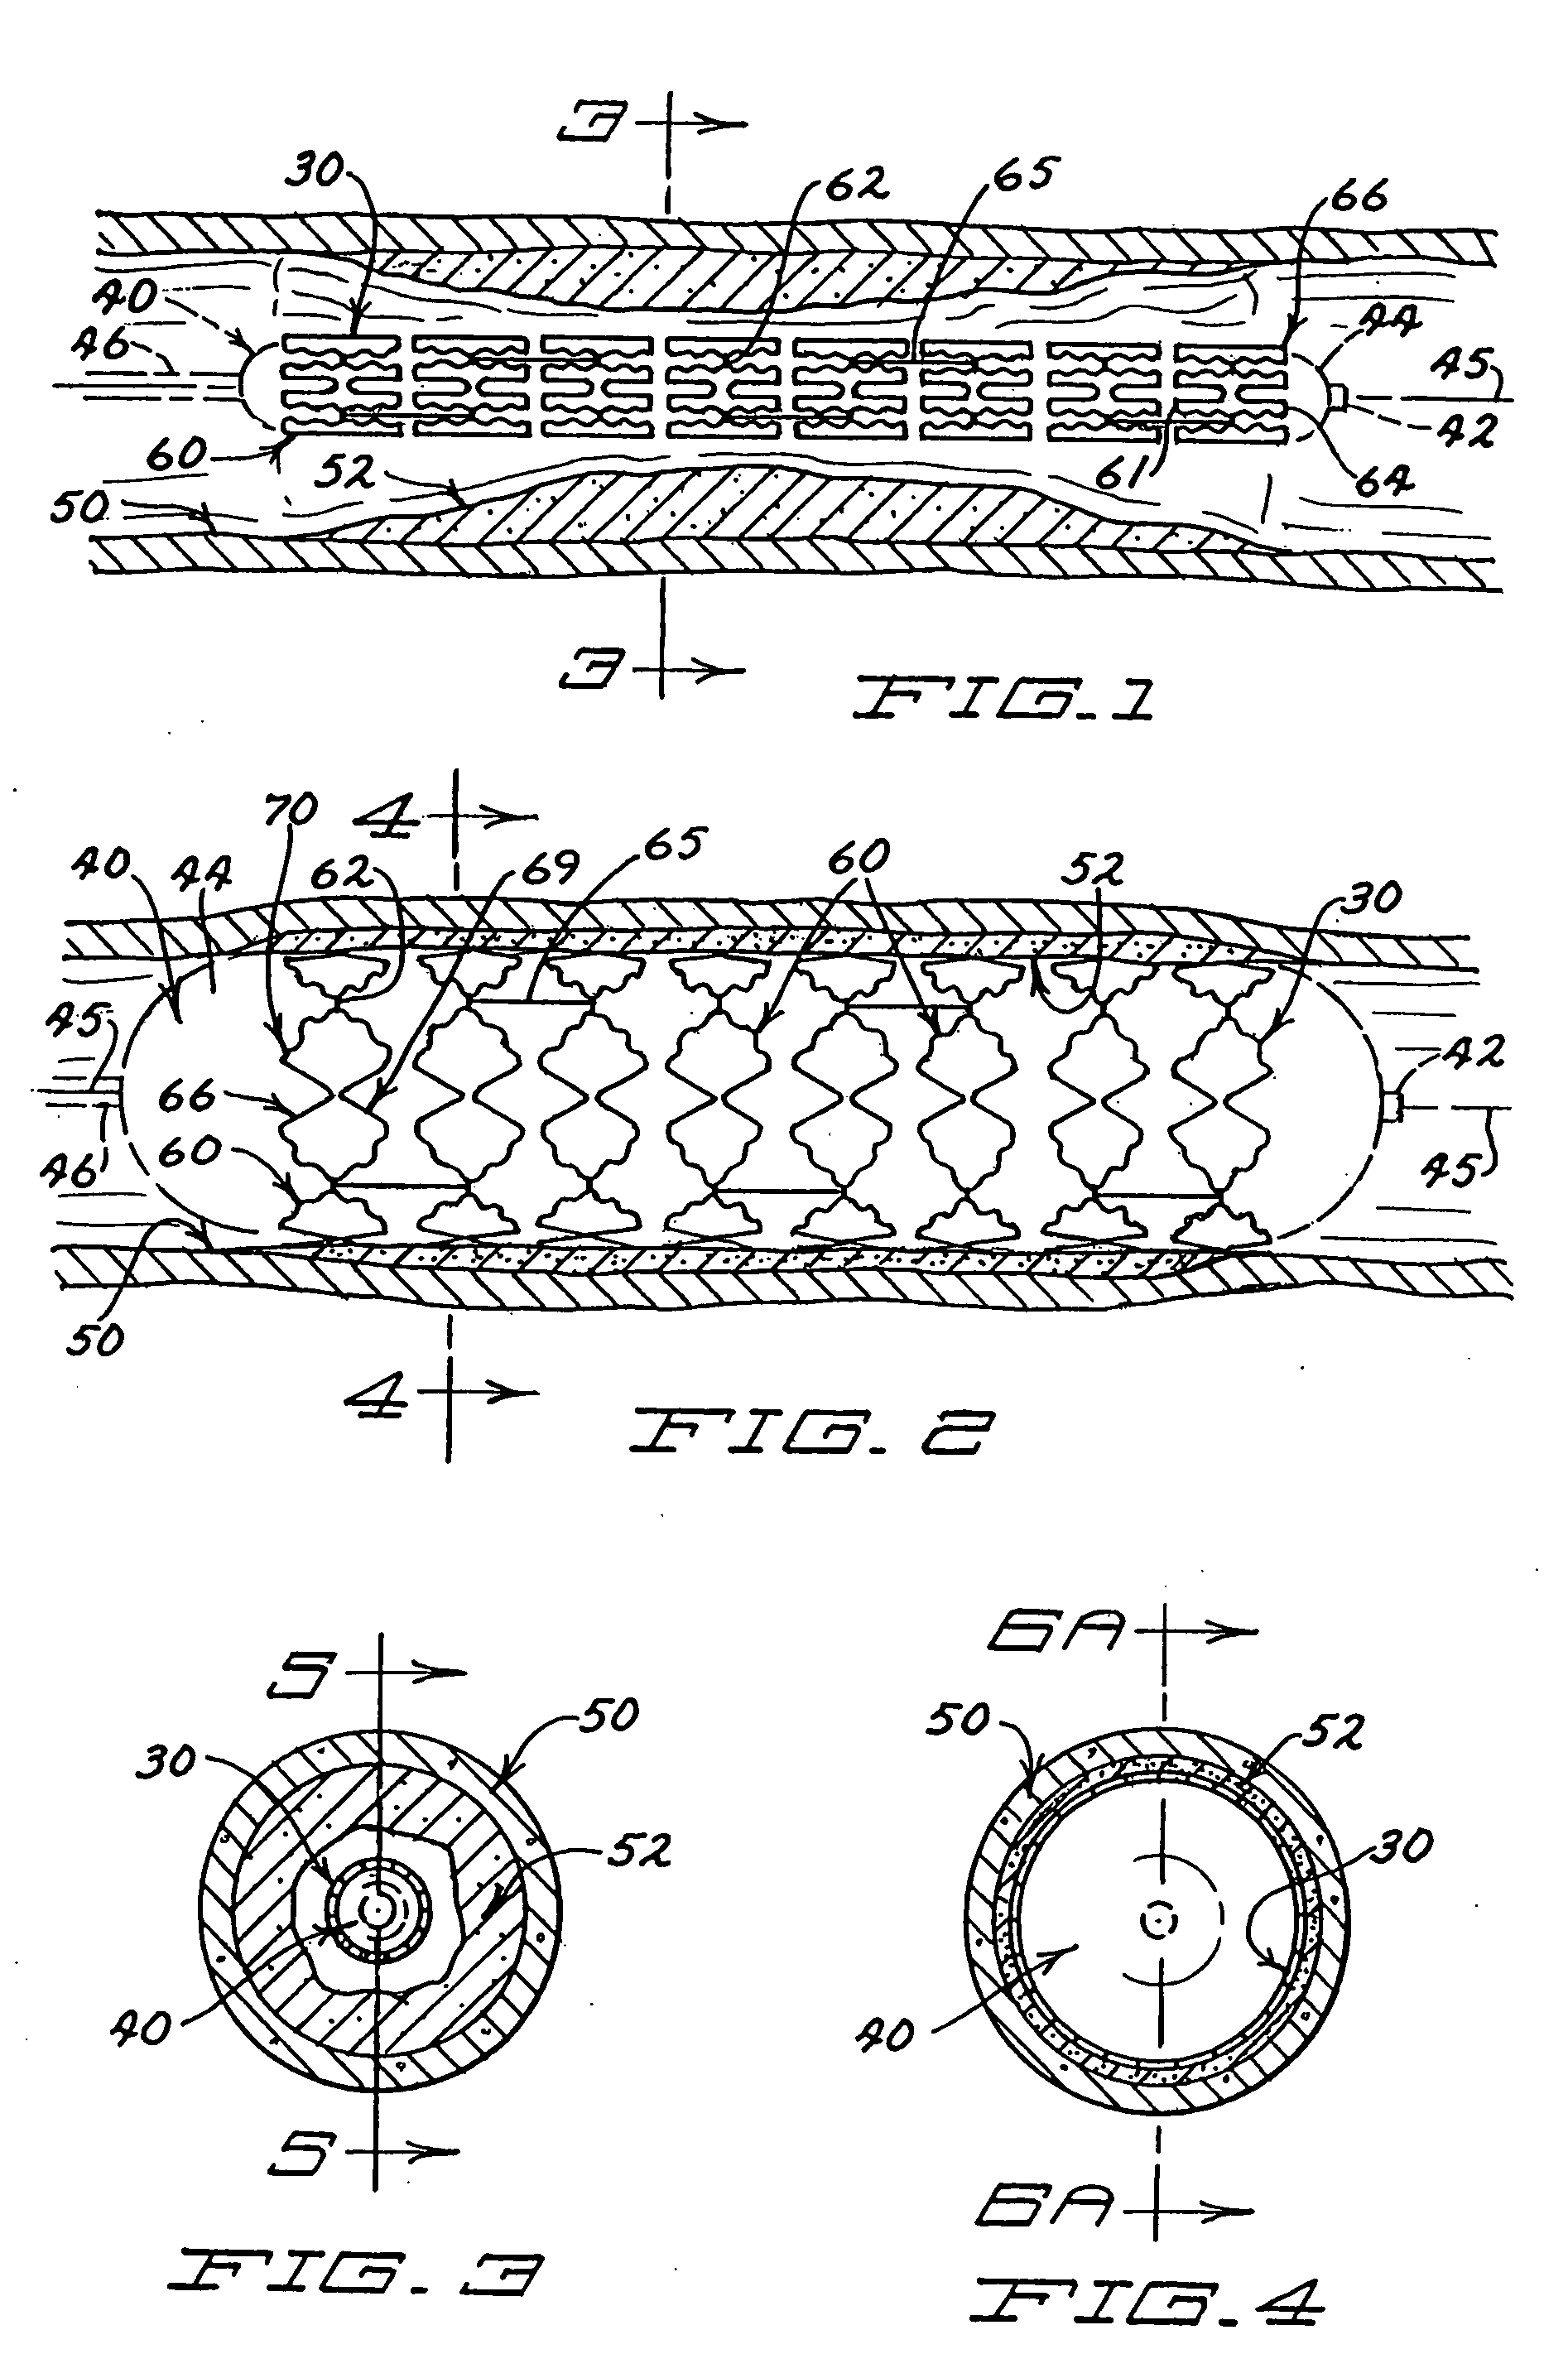 Expandable stent having plurality of interconnected expansion modules